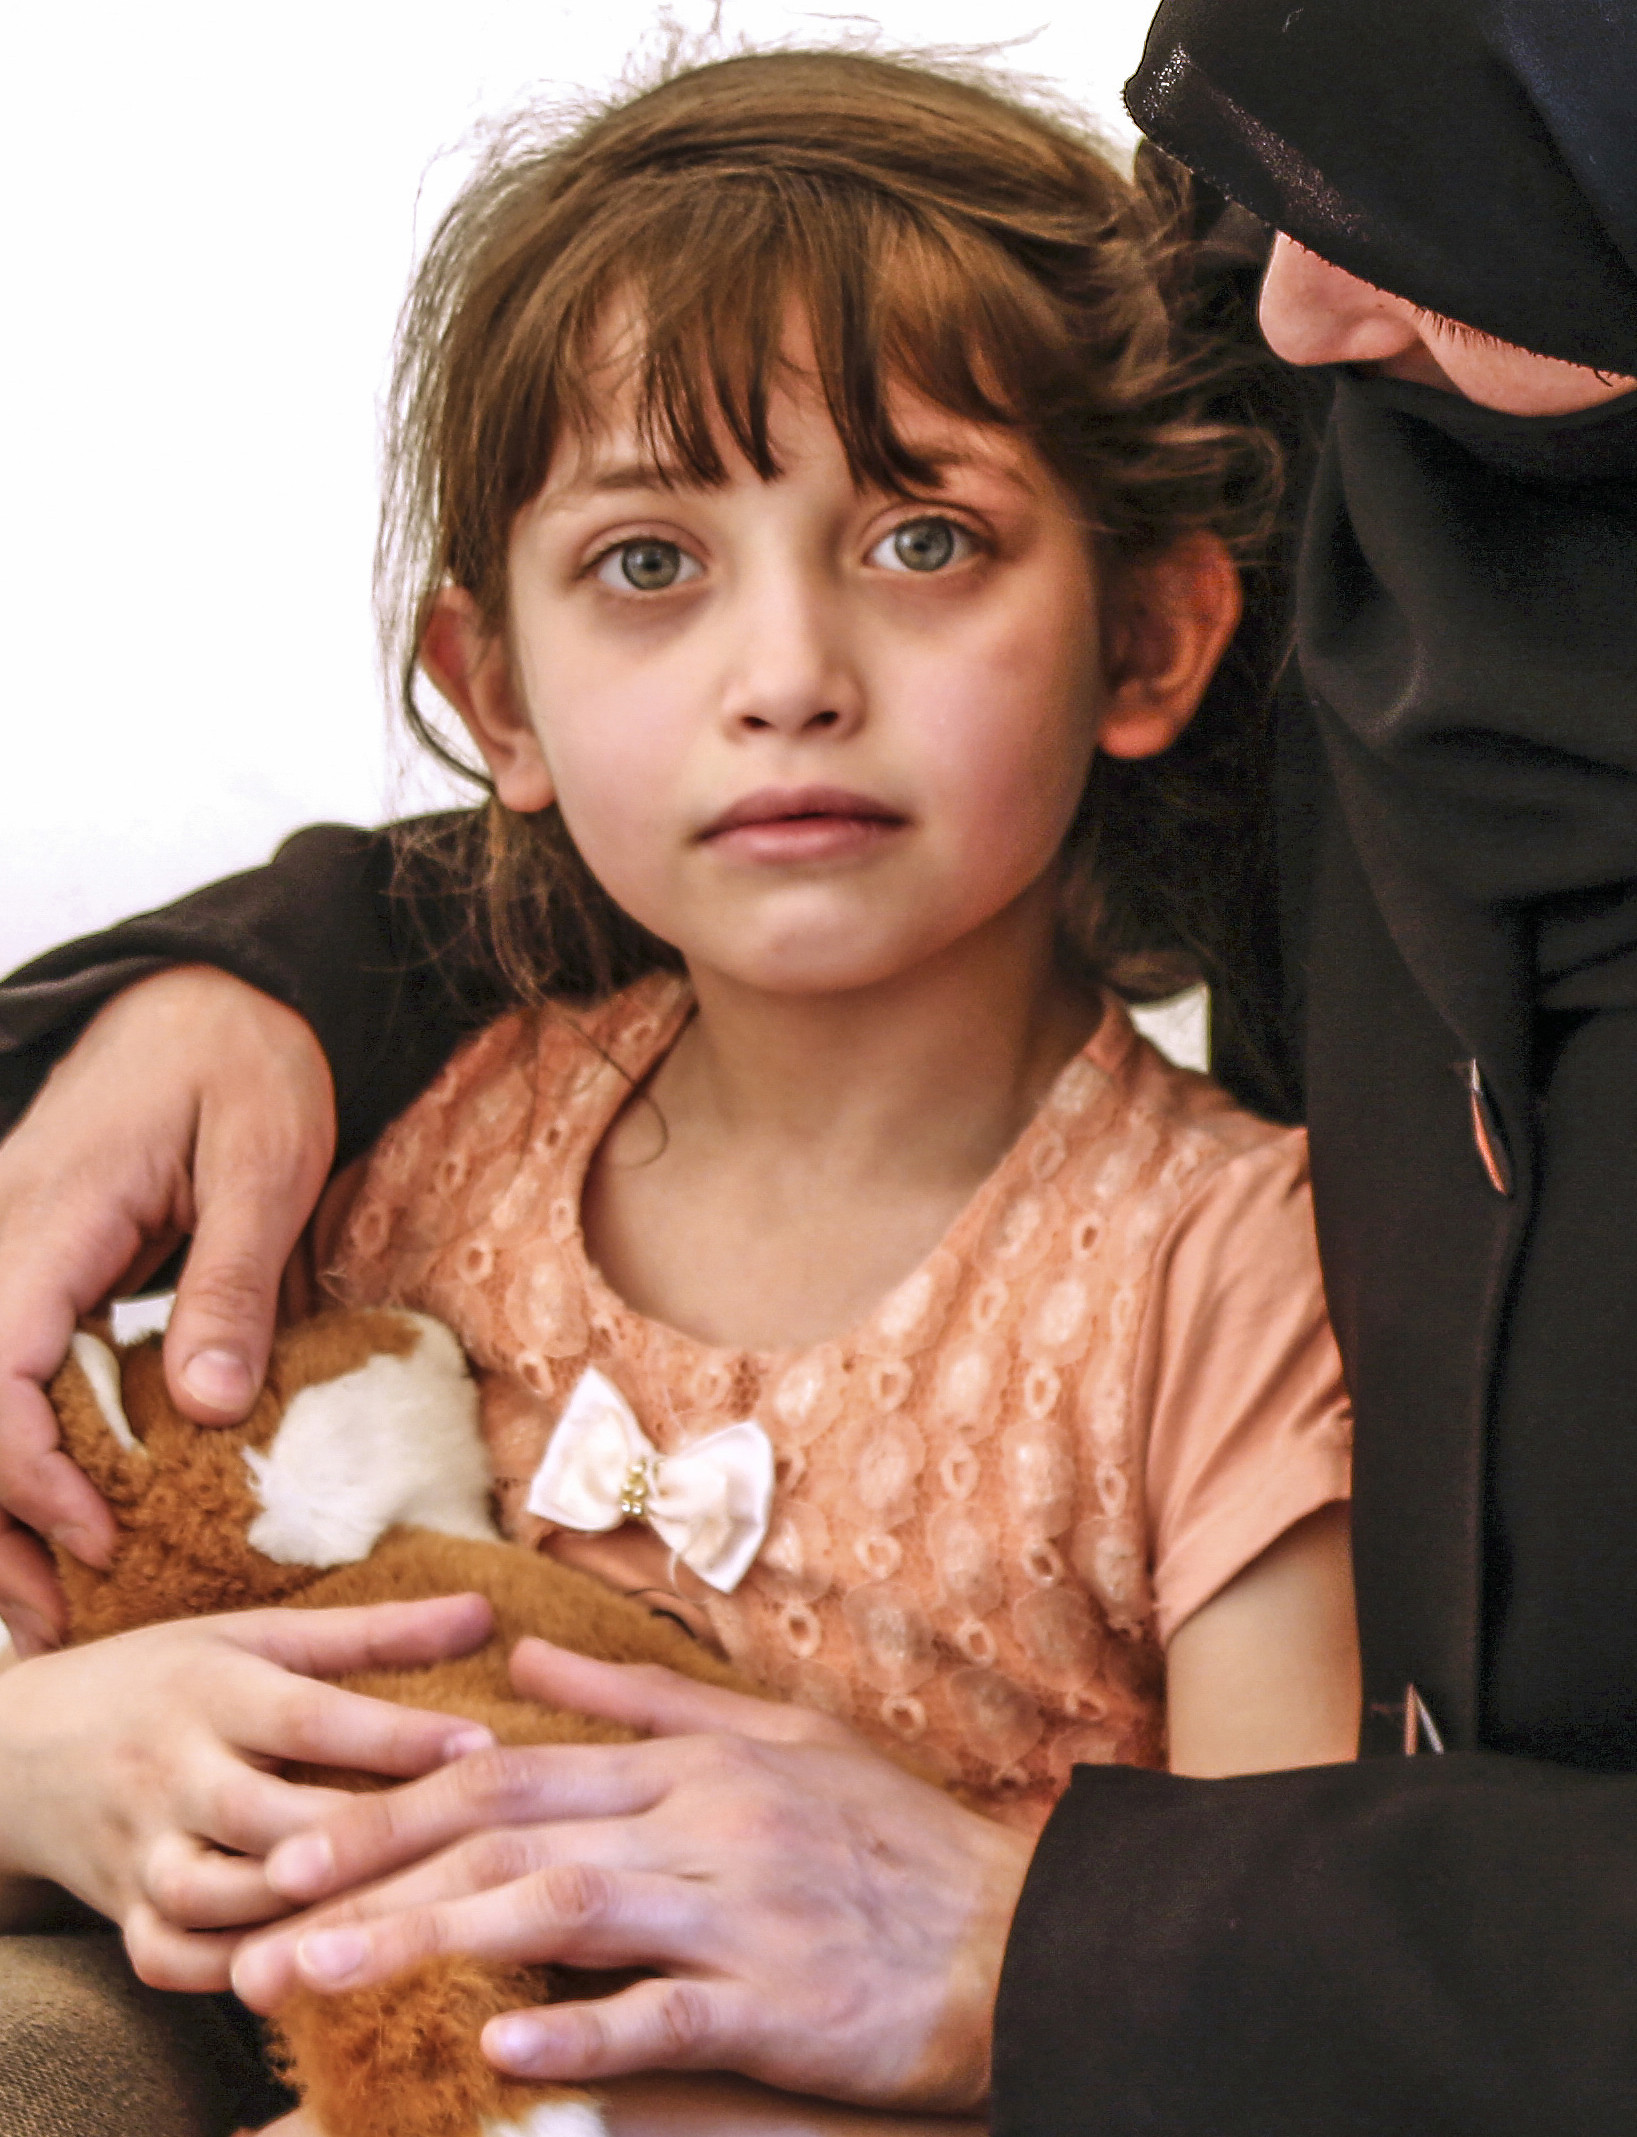 This little girl has become the face of Syrian tragedy